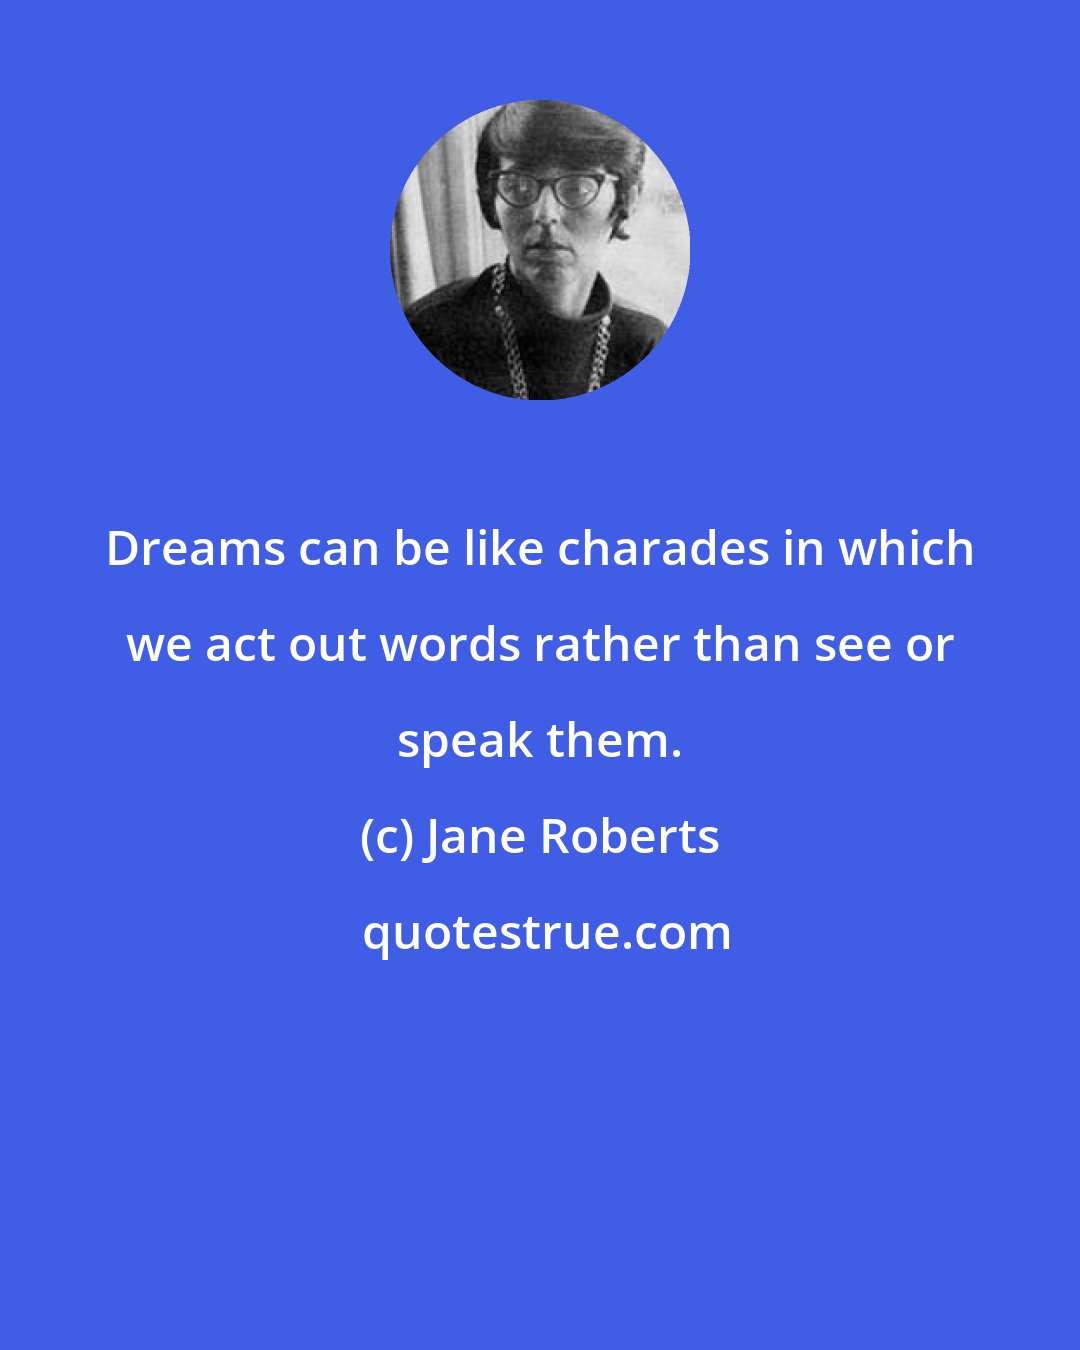 Jane Roberts: Dreams can be like charades in which we act out words rather than see or speak them.